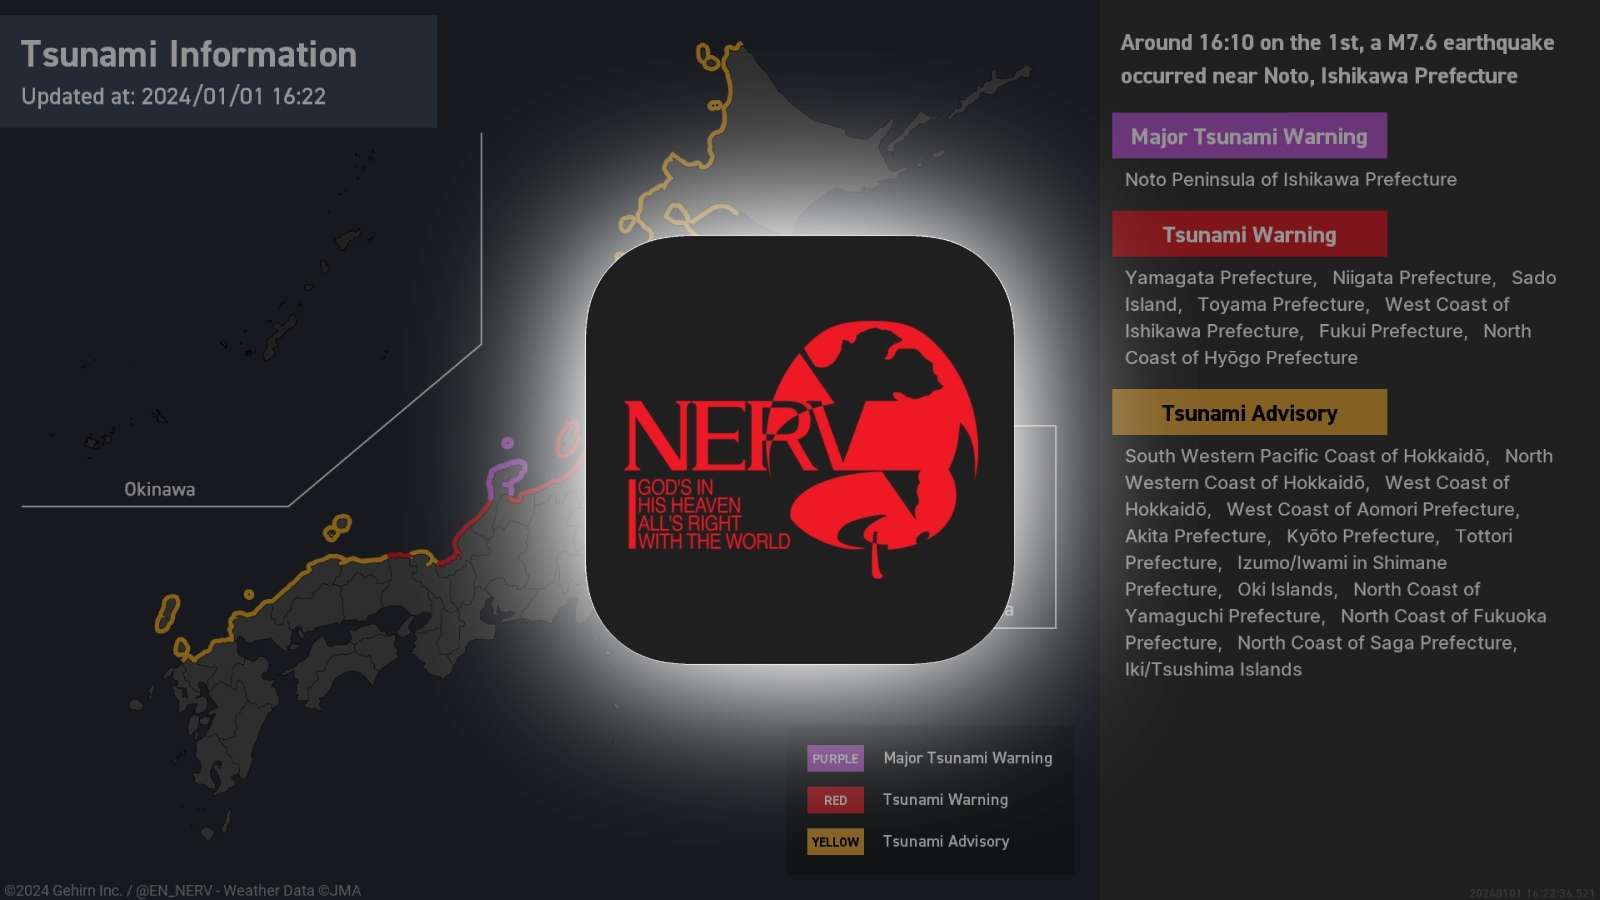 Nerv app Japan logo on a background from an image posted on the service